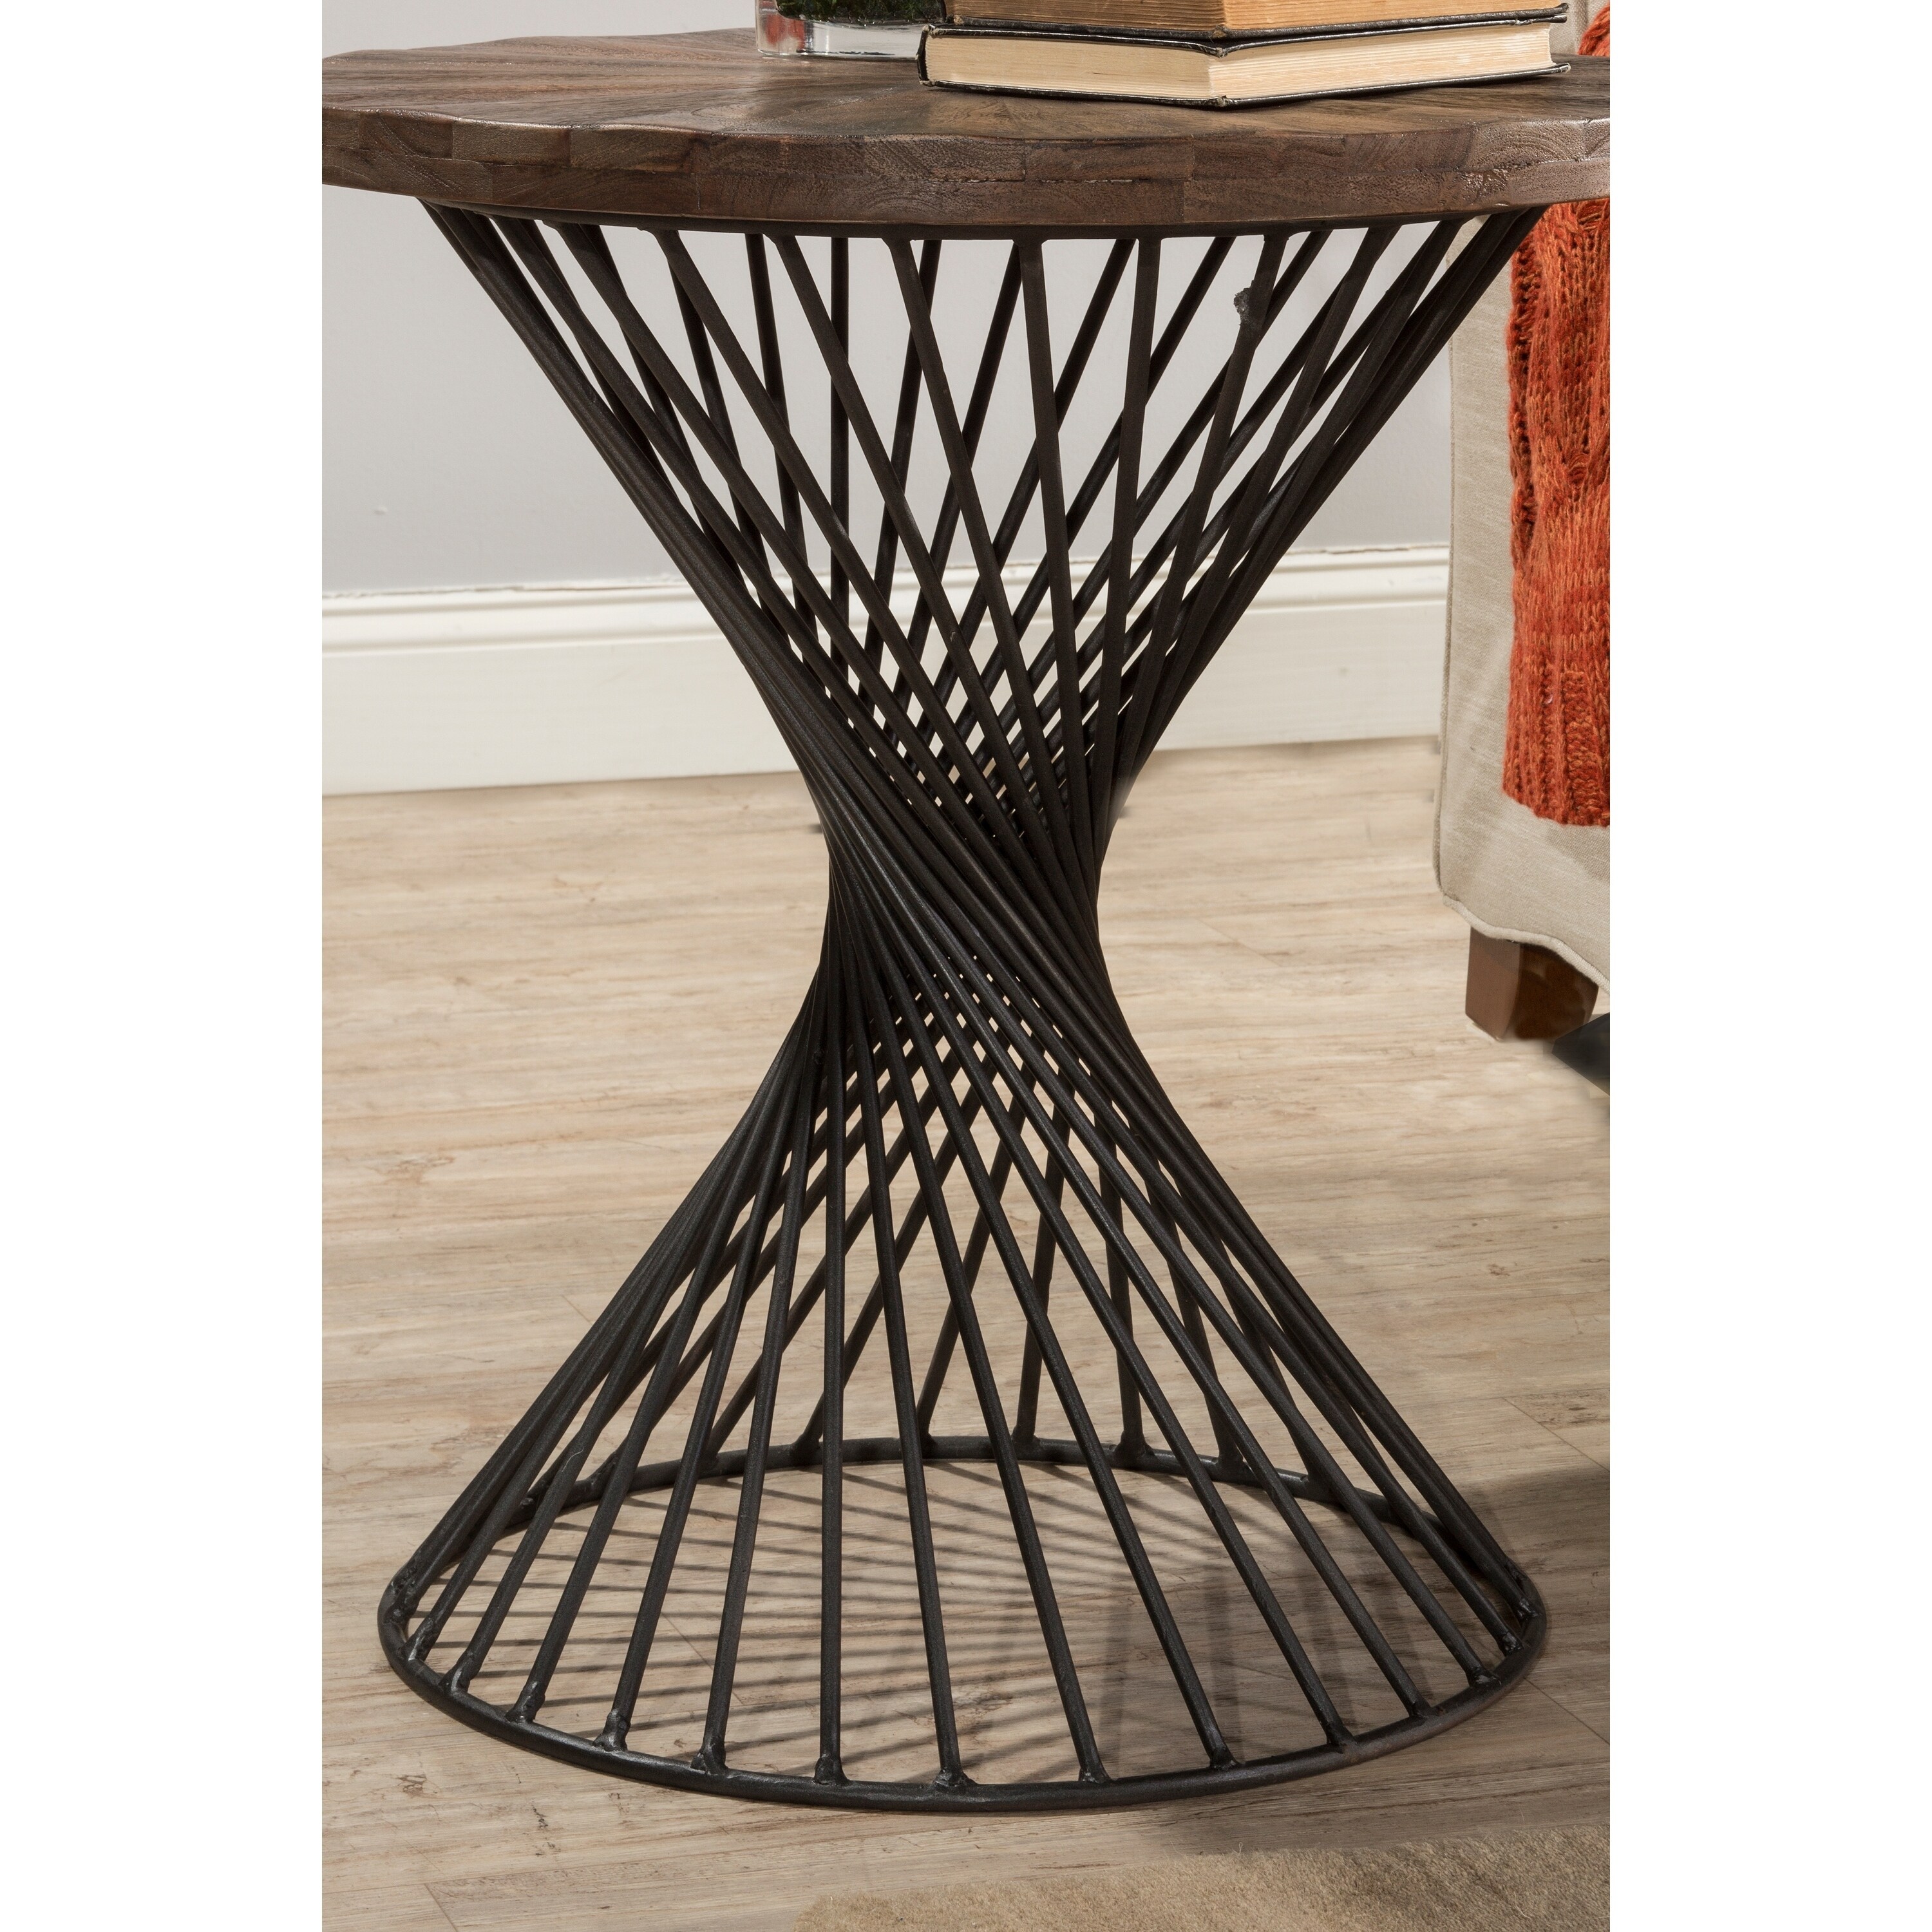 Kanister End Table - 22"W x 22"L x 24"H